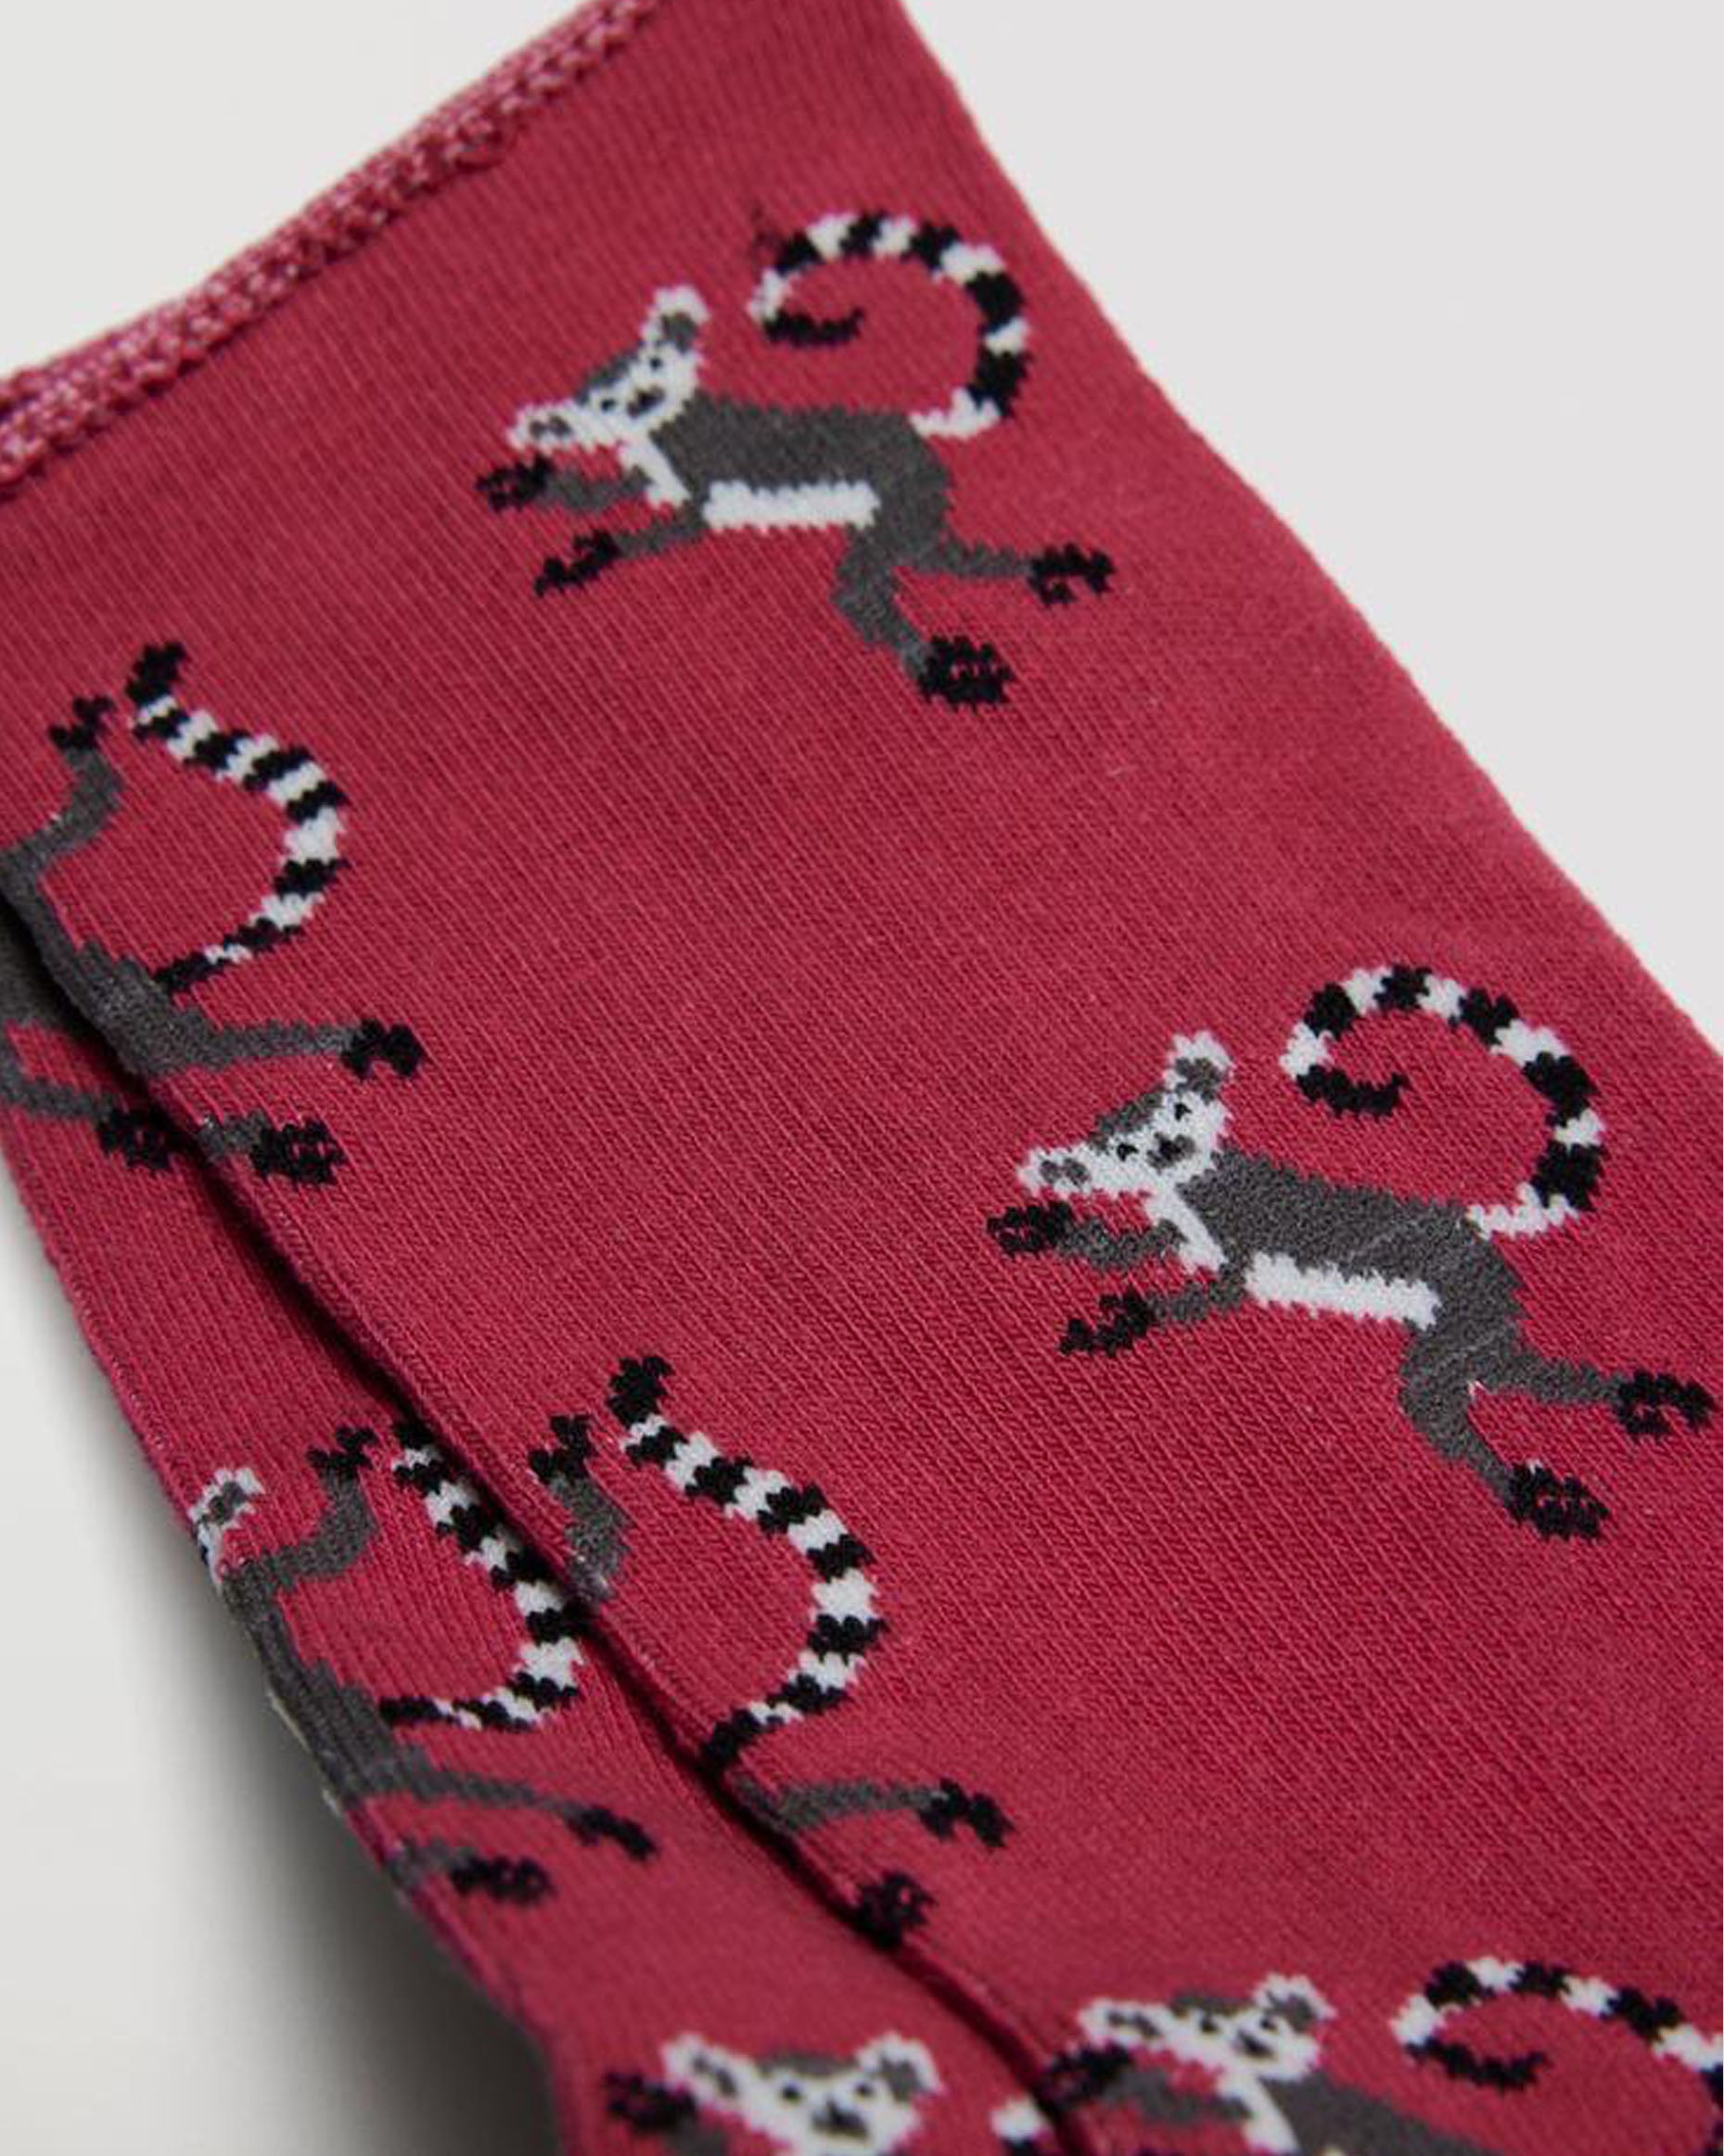 Ysabel Mora 12880 Lemur Sock - Dark red cotton socks with an all over lemur monkey pattern in dark grey, black and white and no cuff.